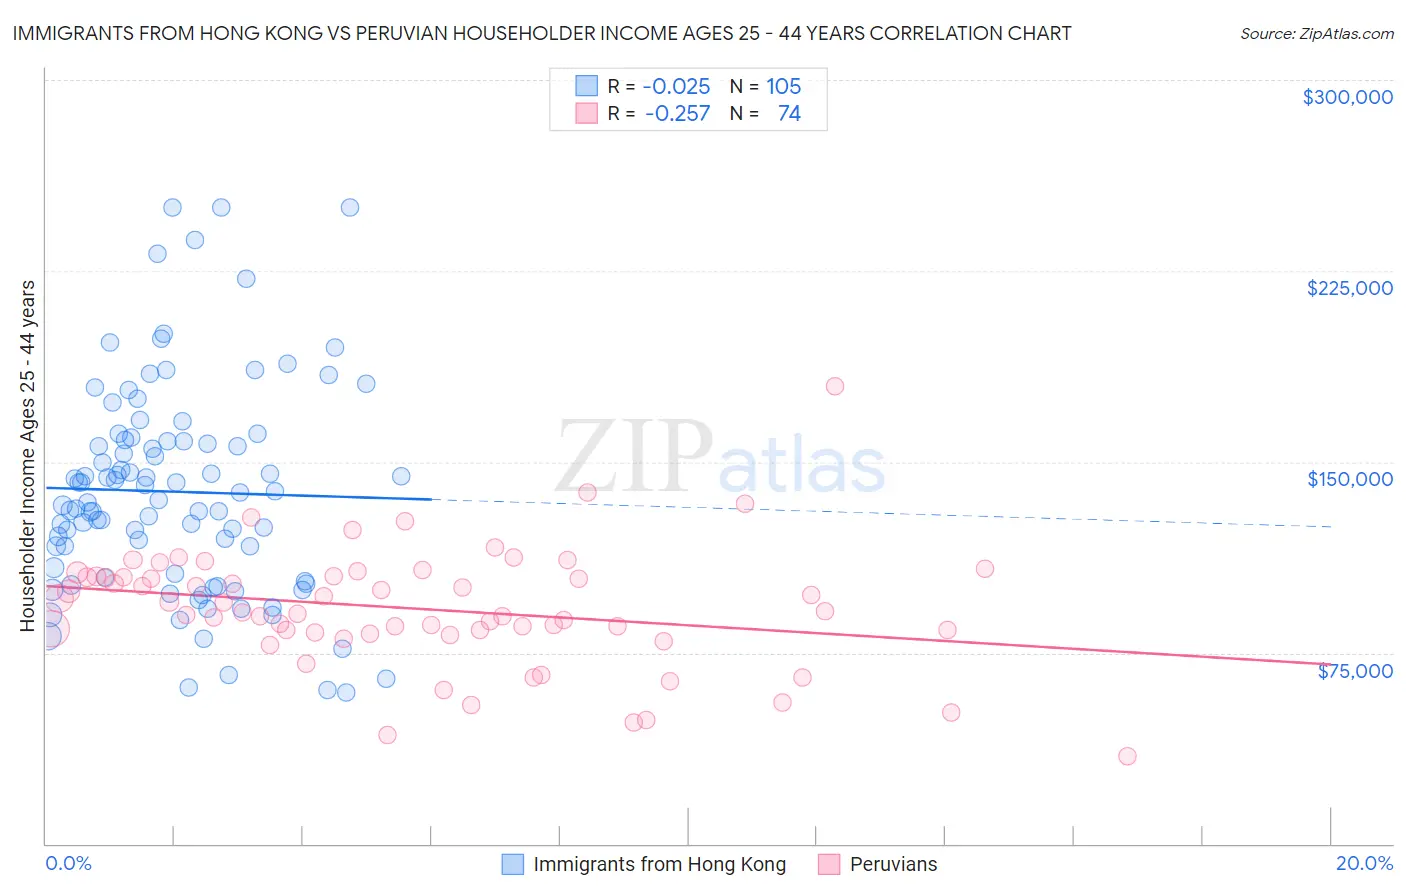 Immigrants from Hong Kong vs Peruvian Householder Income Ages 25 - 44 years